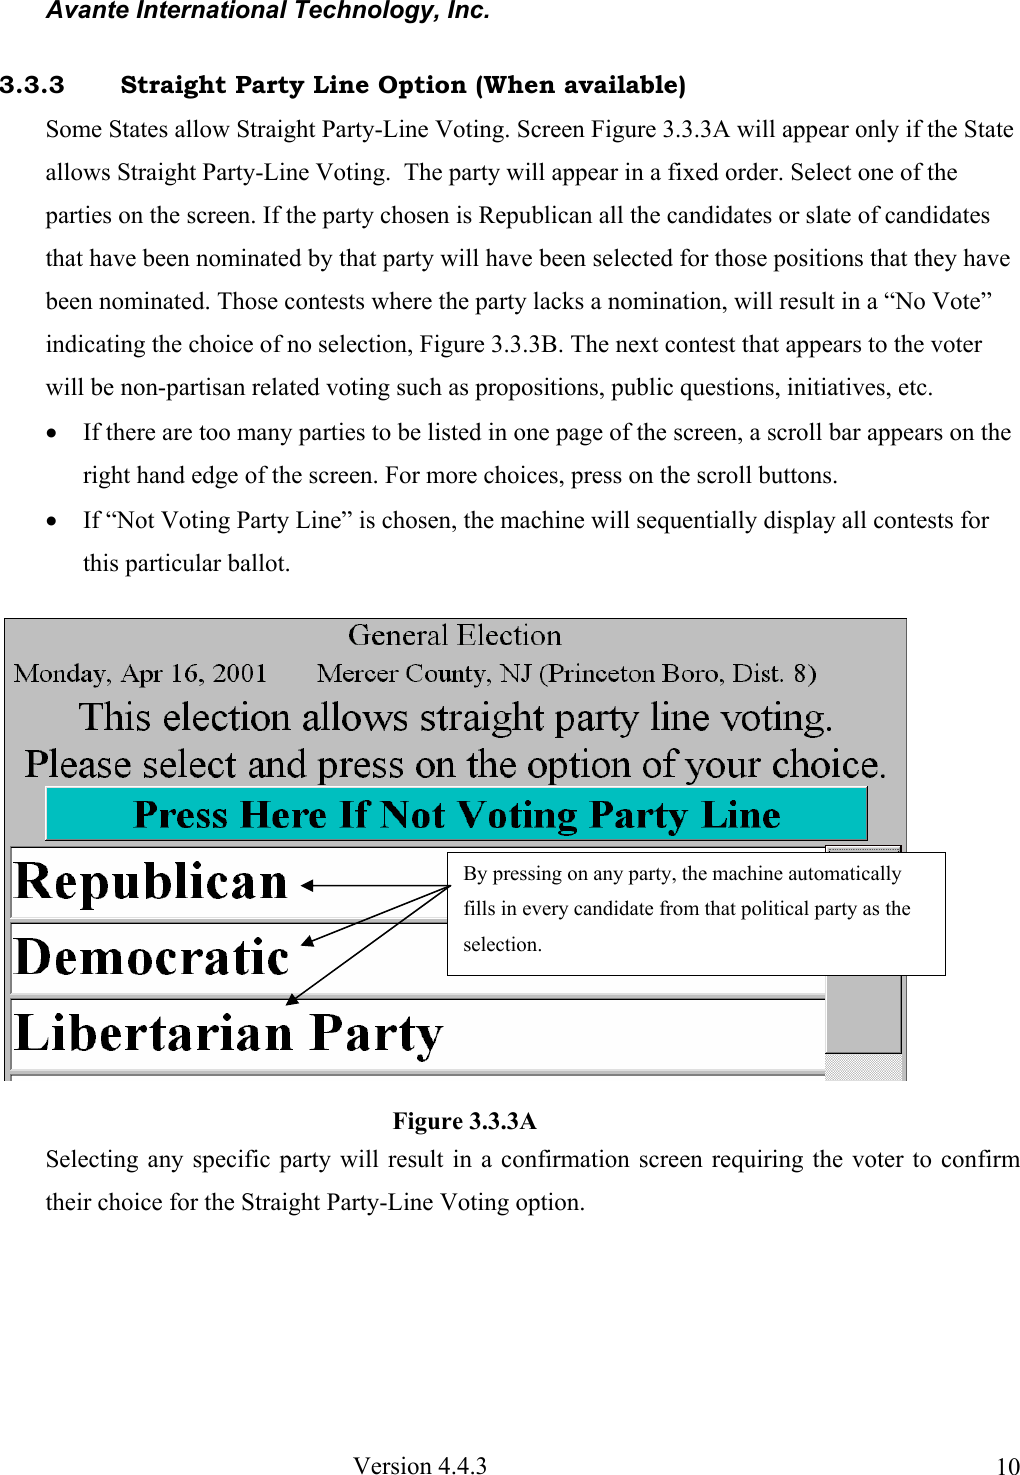 Avante International Technology, Inc.  Version 4.4.3  103.3.3  Straight Party Line Option (When available) Some States allow Straight Party-Line Voting. Screen Figure 3.3.3A will appear only if the State allows Straight Party-Line Voting.  The party will appear in a fixed order. Select one of the parties on the screen. If the party chosen is Republican all the candidates or slate of candidates that have been nominated by that party will have been selected for those positions that they have been nominated. Those contests where the party lacks a nomination, will result in a “No Vote” indicating the choice of no selection, Figure 3.3.3B. The next contest that appears to the voter will be non-partisan related voting such as propositions, public questions, initiatives, etc. • If there are too many parties to be listed in one page of the screen, a scroll bar appears on the right hand edge of the screen. For more choices, press on the scroll buttons.  • If “Not Voting Party Line” is chosen, the machine will sequentially display all contests for this particular ballot.  Selecting any specific party will result in a confirmation screen requiring the voter to confirm their choice for the Straight Party-Line Voting option.     Figure 3.3.3A By pressing on any party, the machine automatically fills in every candidate from that political party as the selection.  